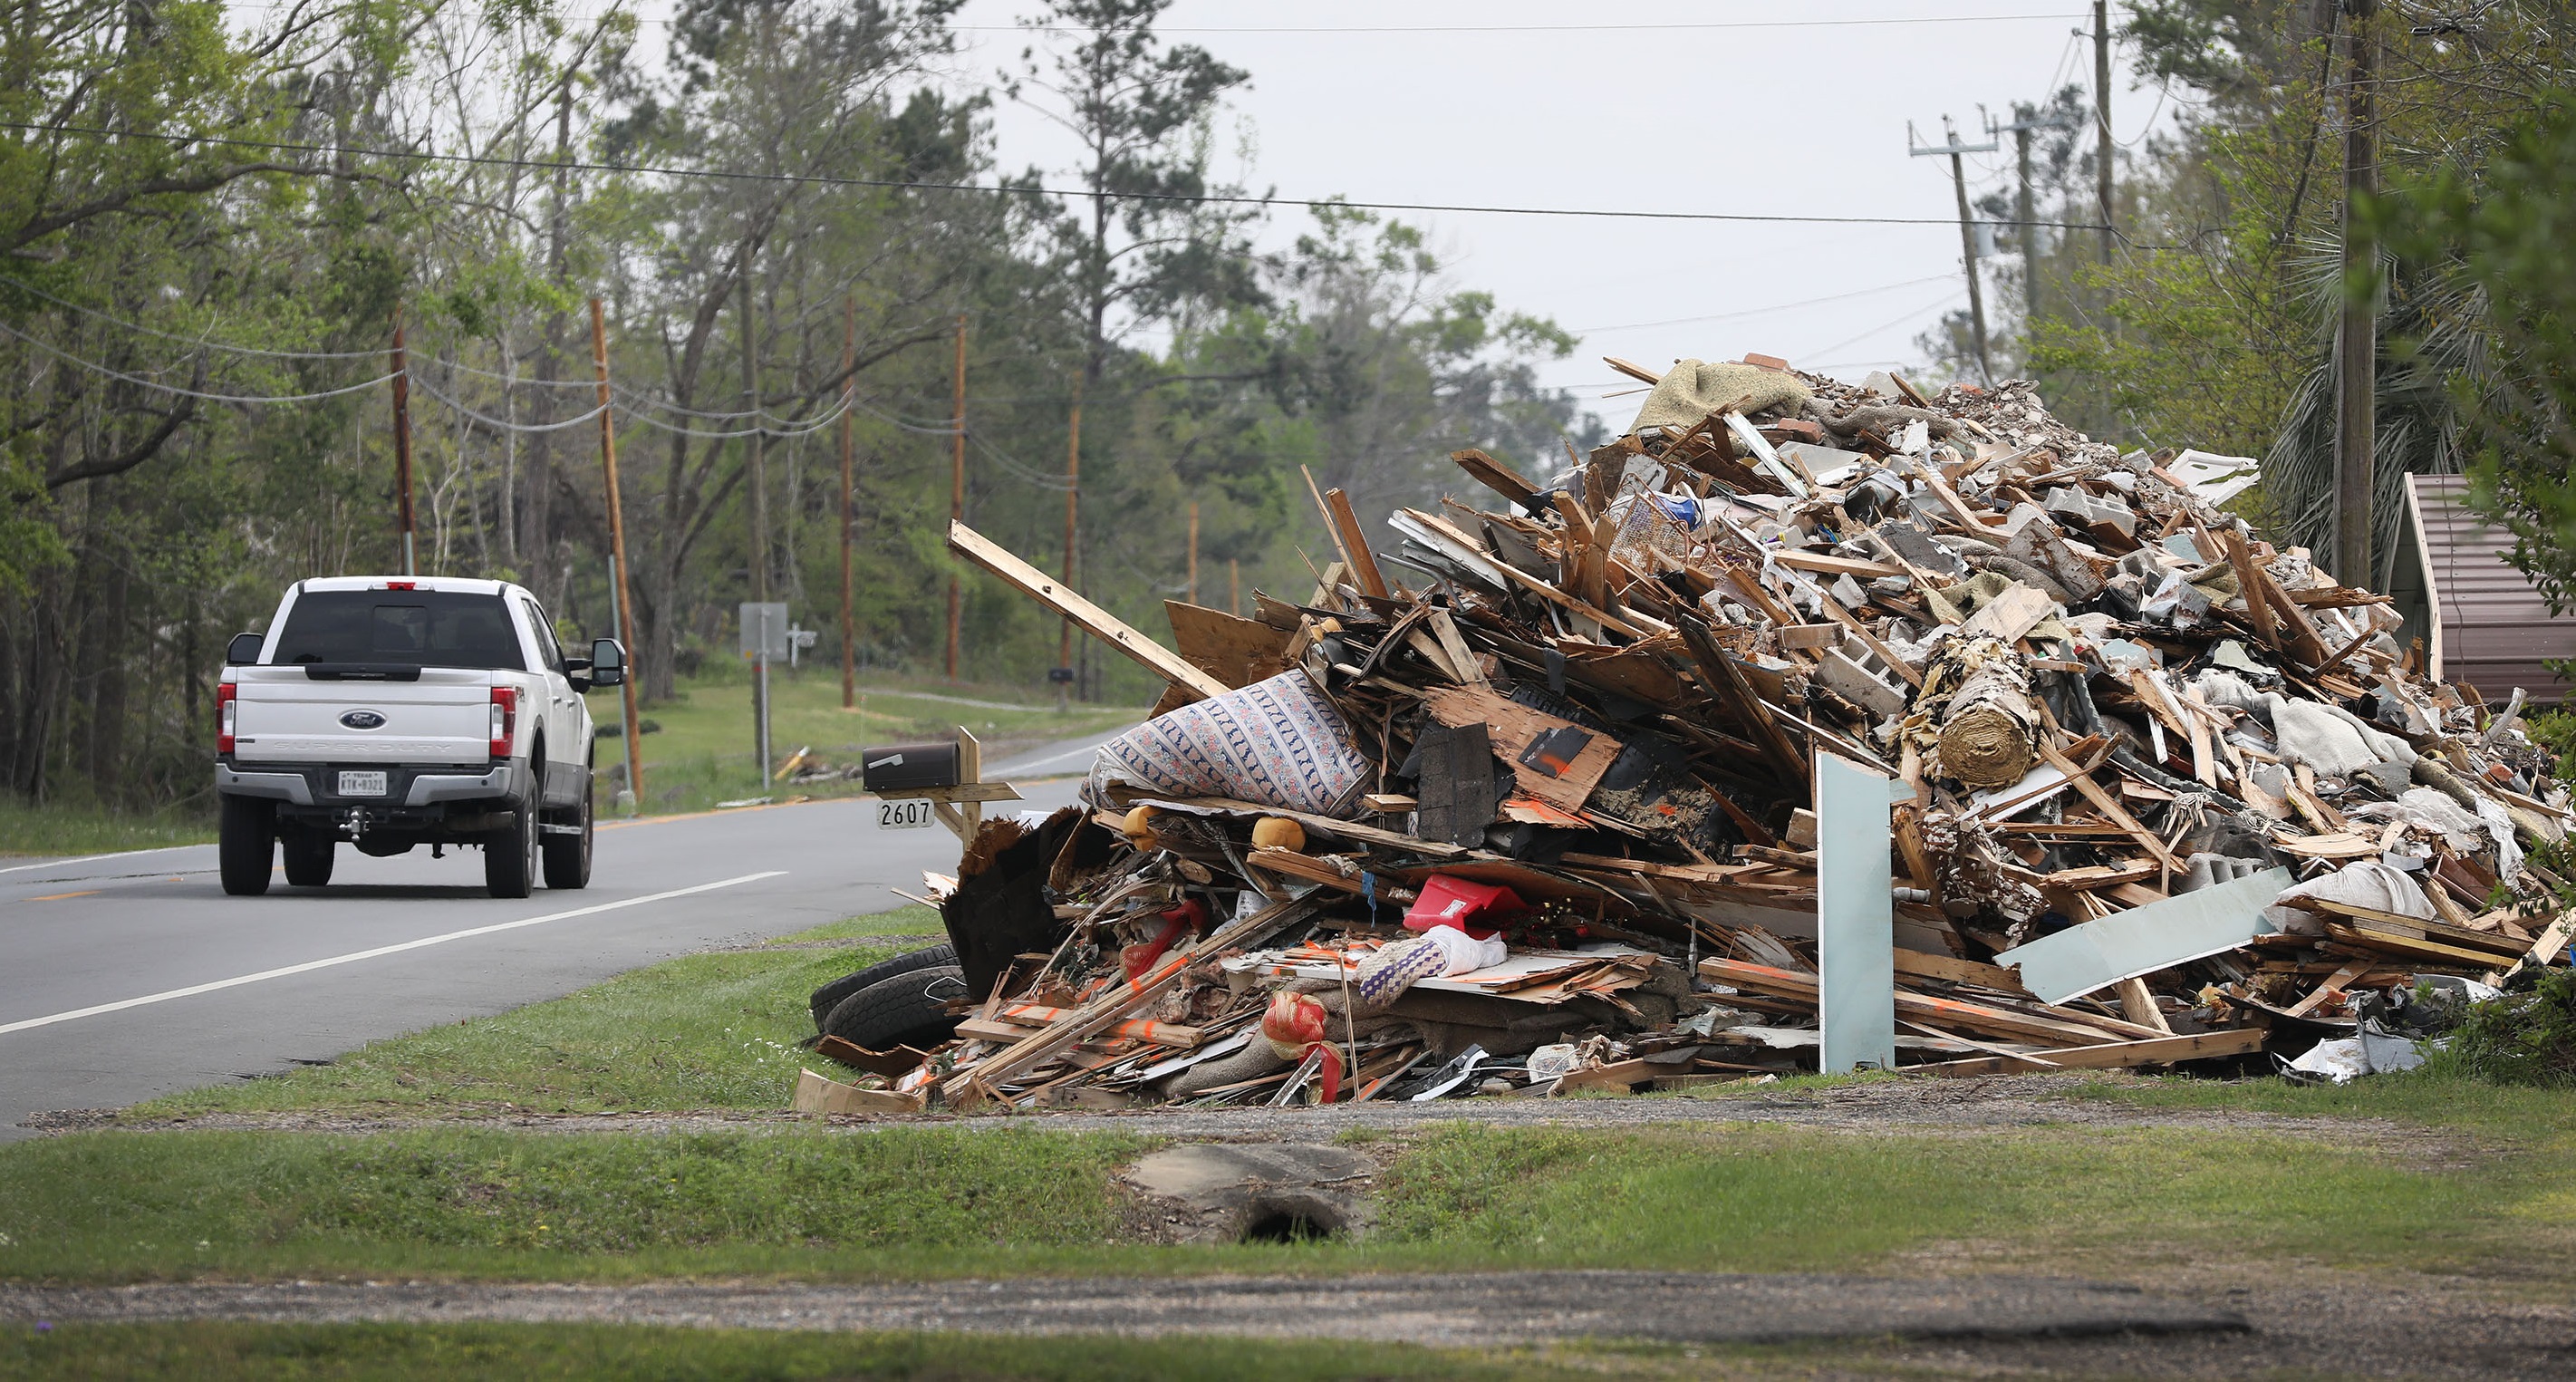 debris on the side of the road